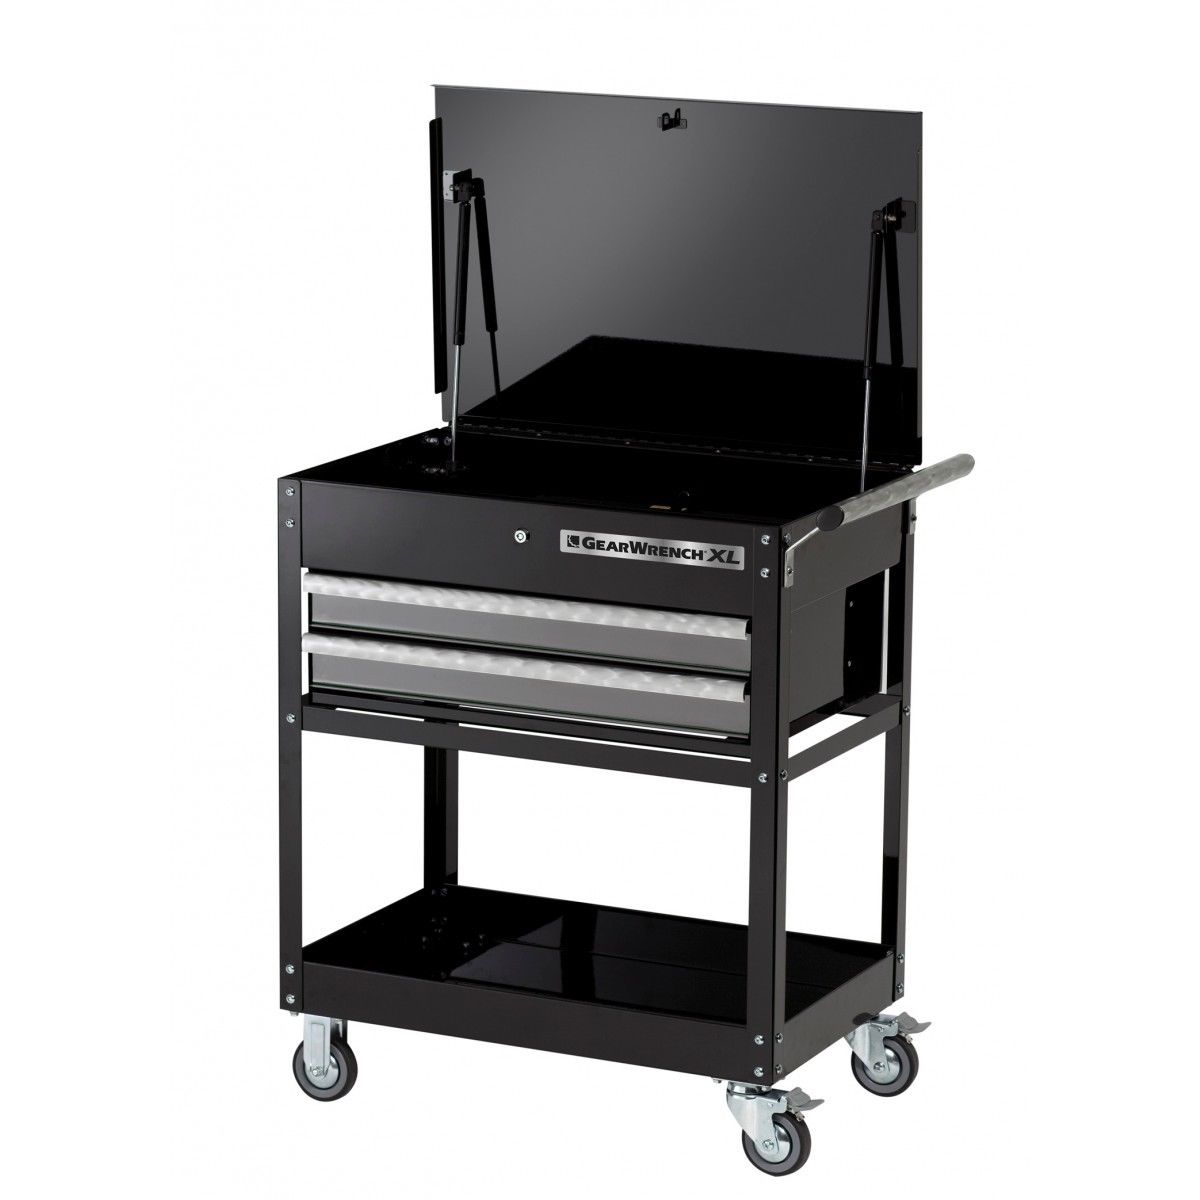 GearWrench 83152 2 Drawer Tool Cart Gas Shocks Powder Coated Black Lock Casters